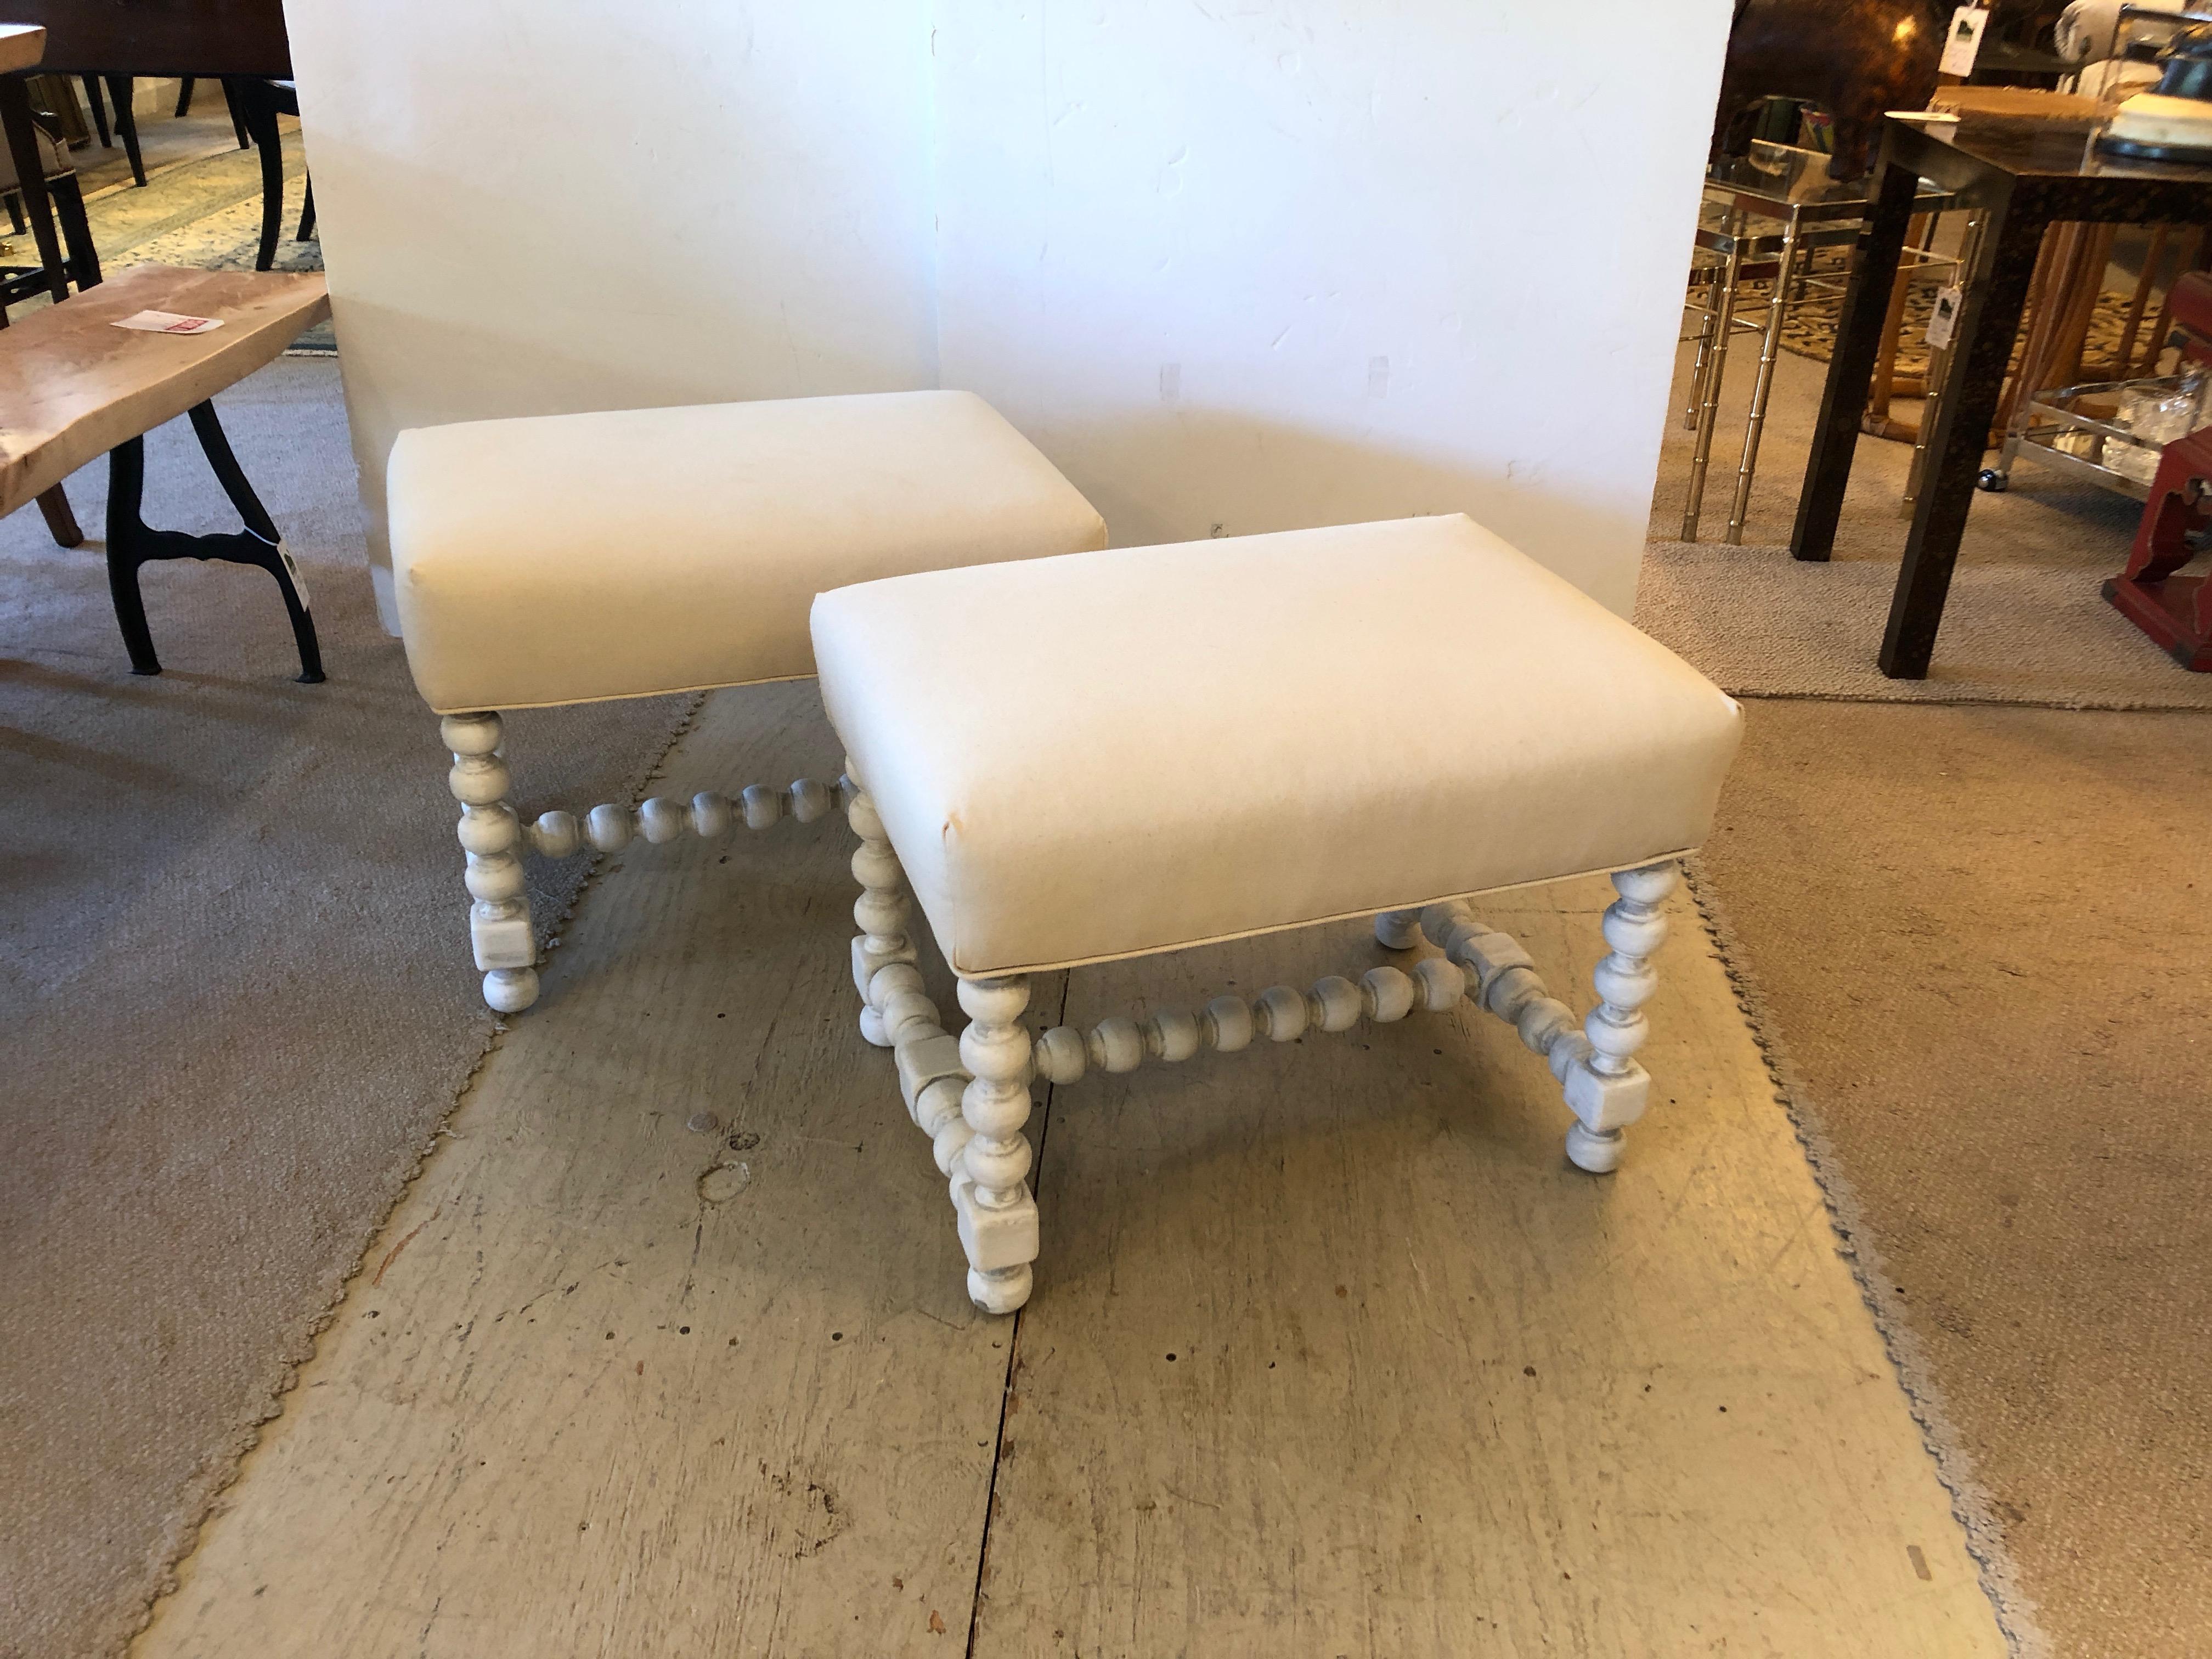 Two neutral and stylish ottomans or benches having grey painted turned wood barley twisty
bases and white duck upholstered tops.